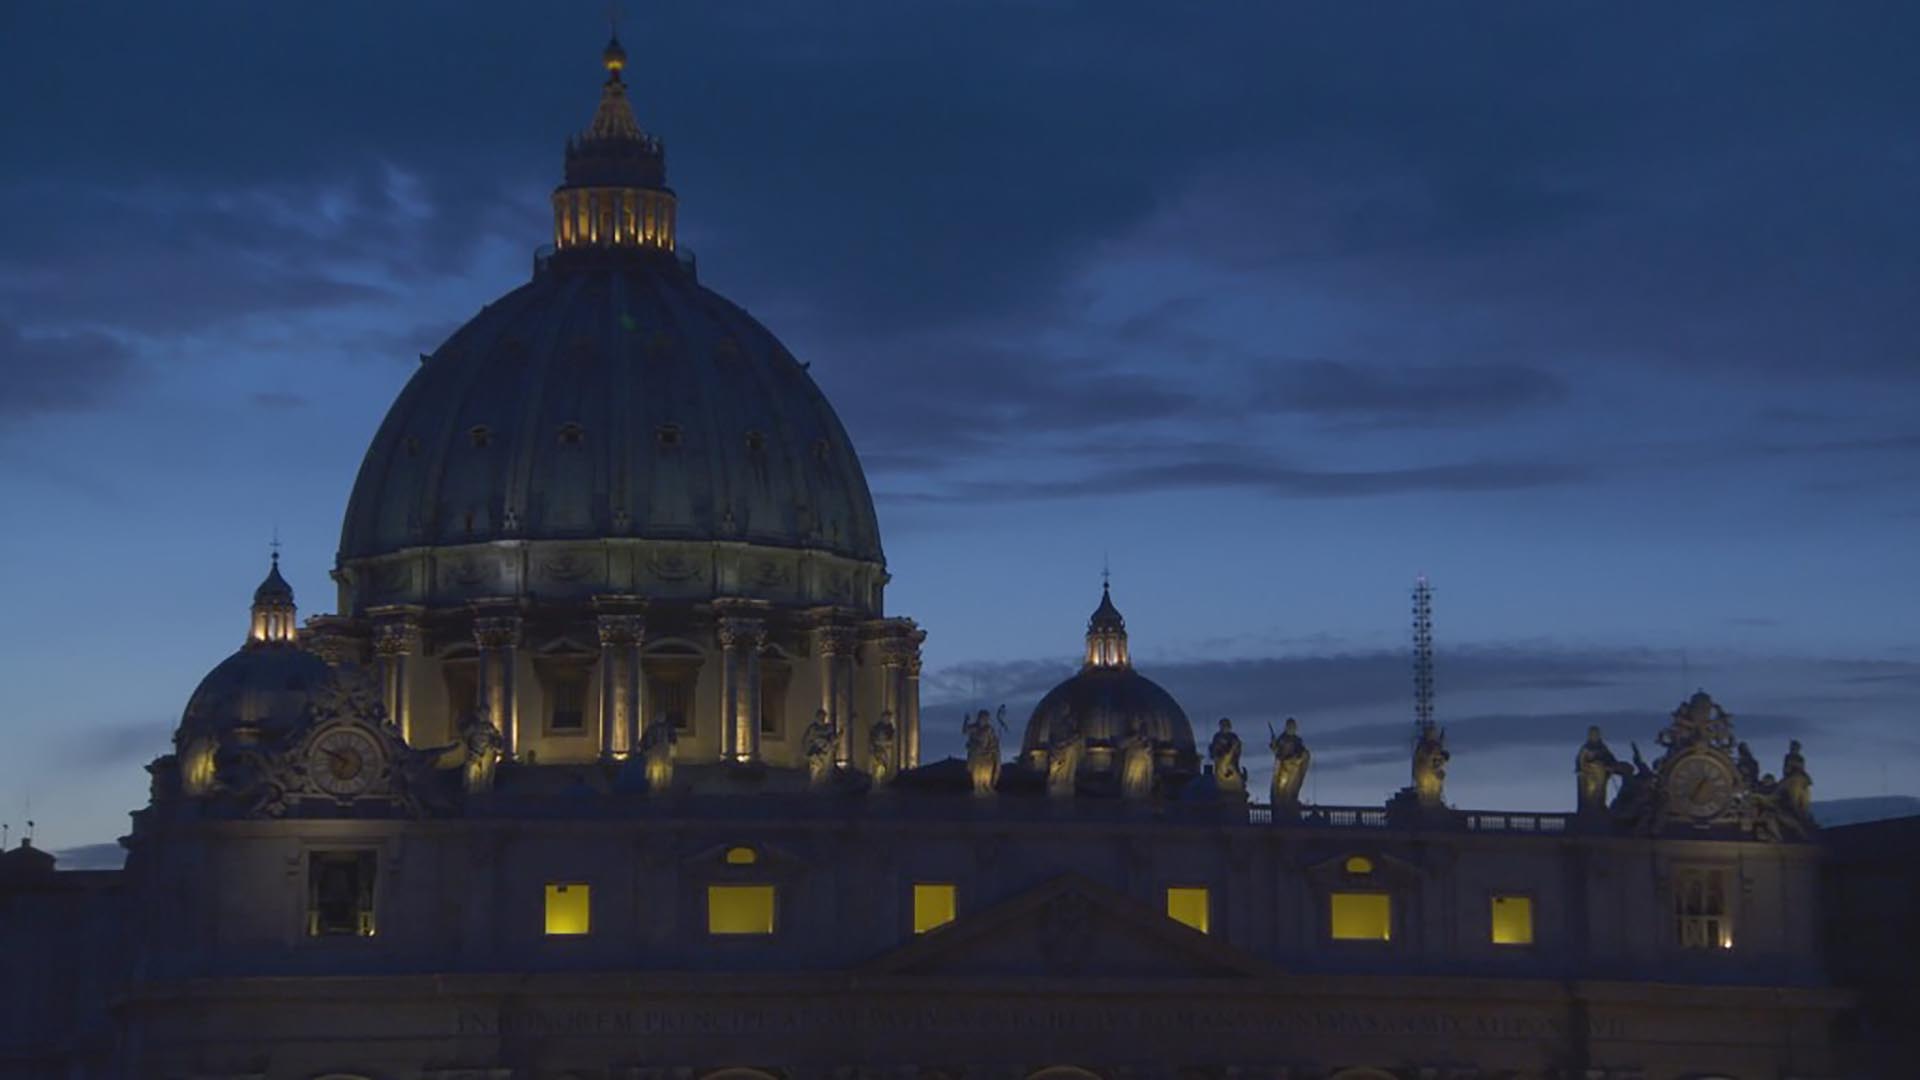 The Vatican at night.